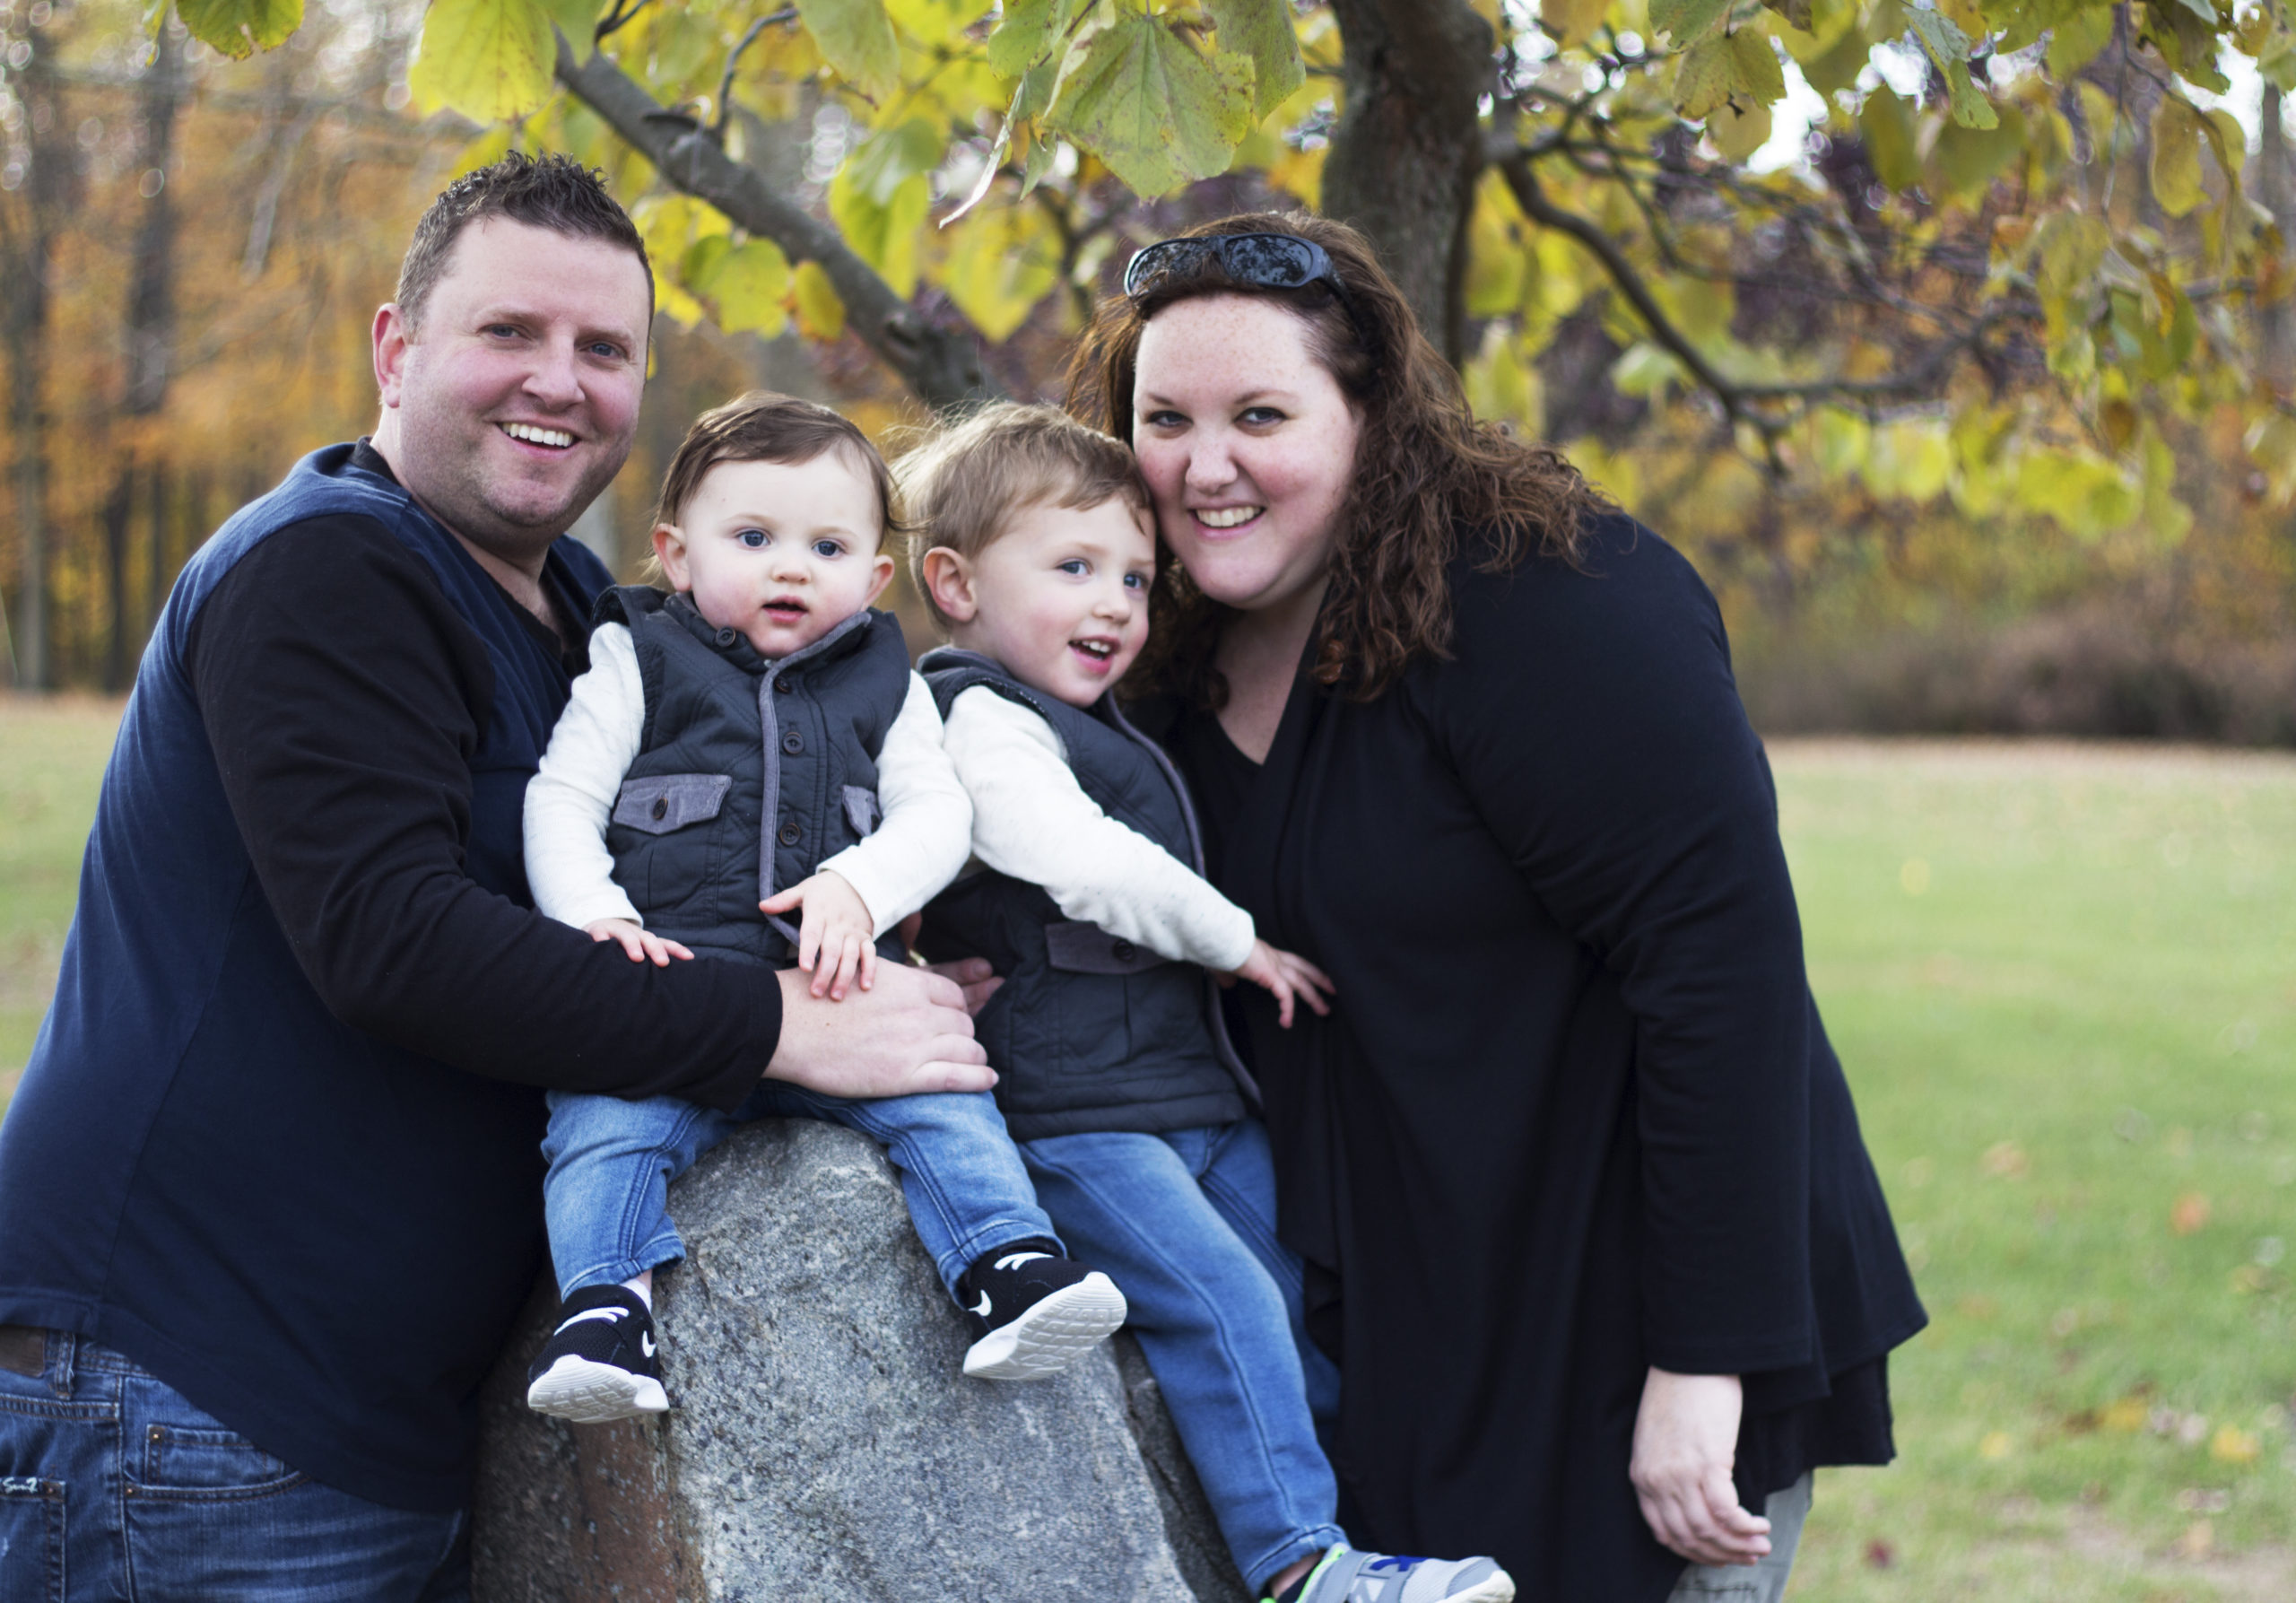 Family of four smiling together at their family photo session.